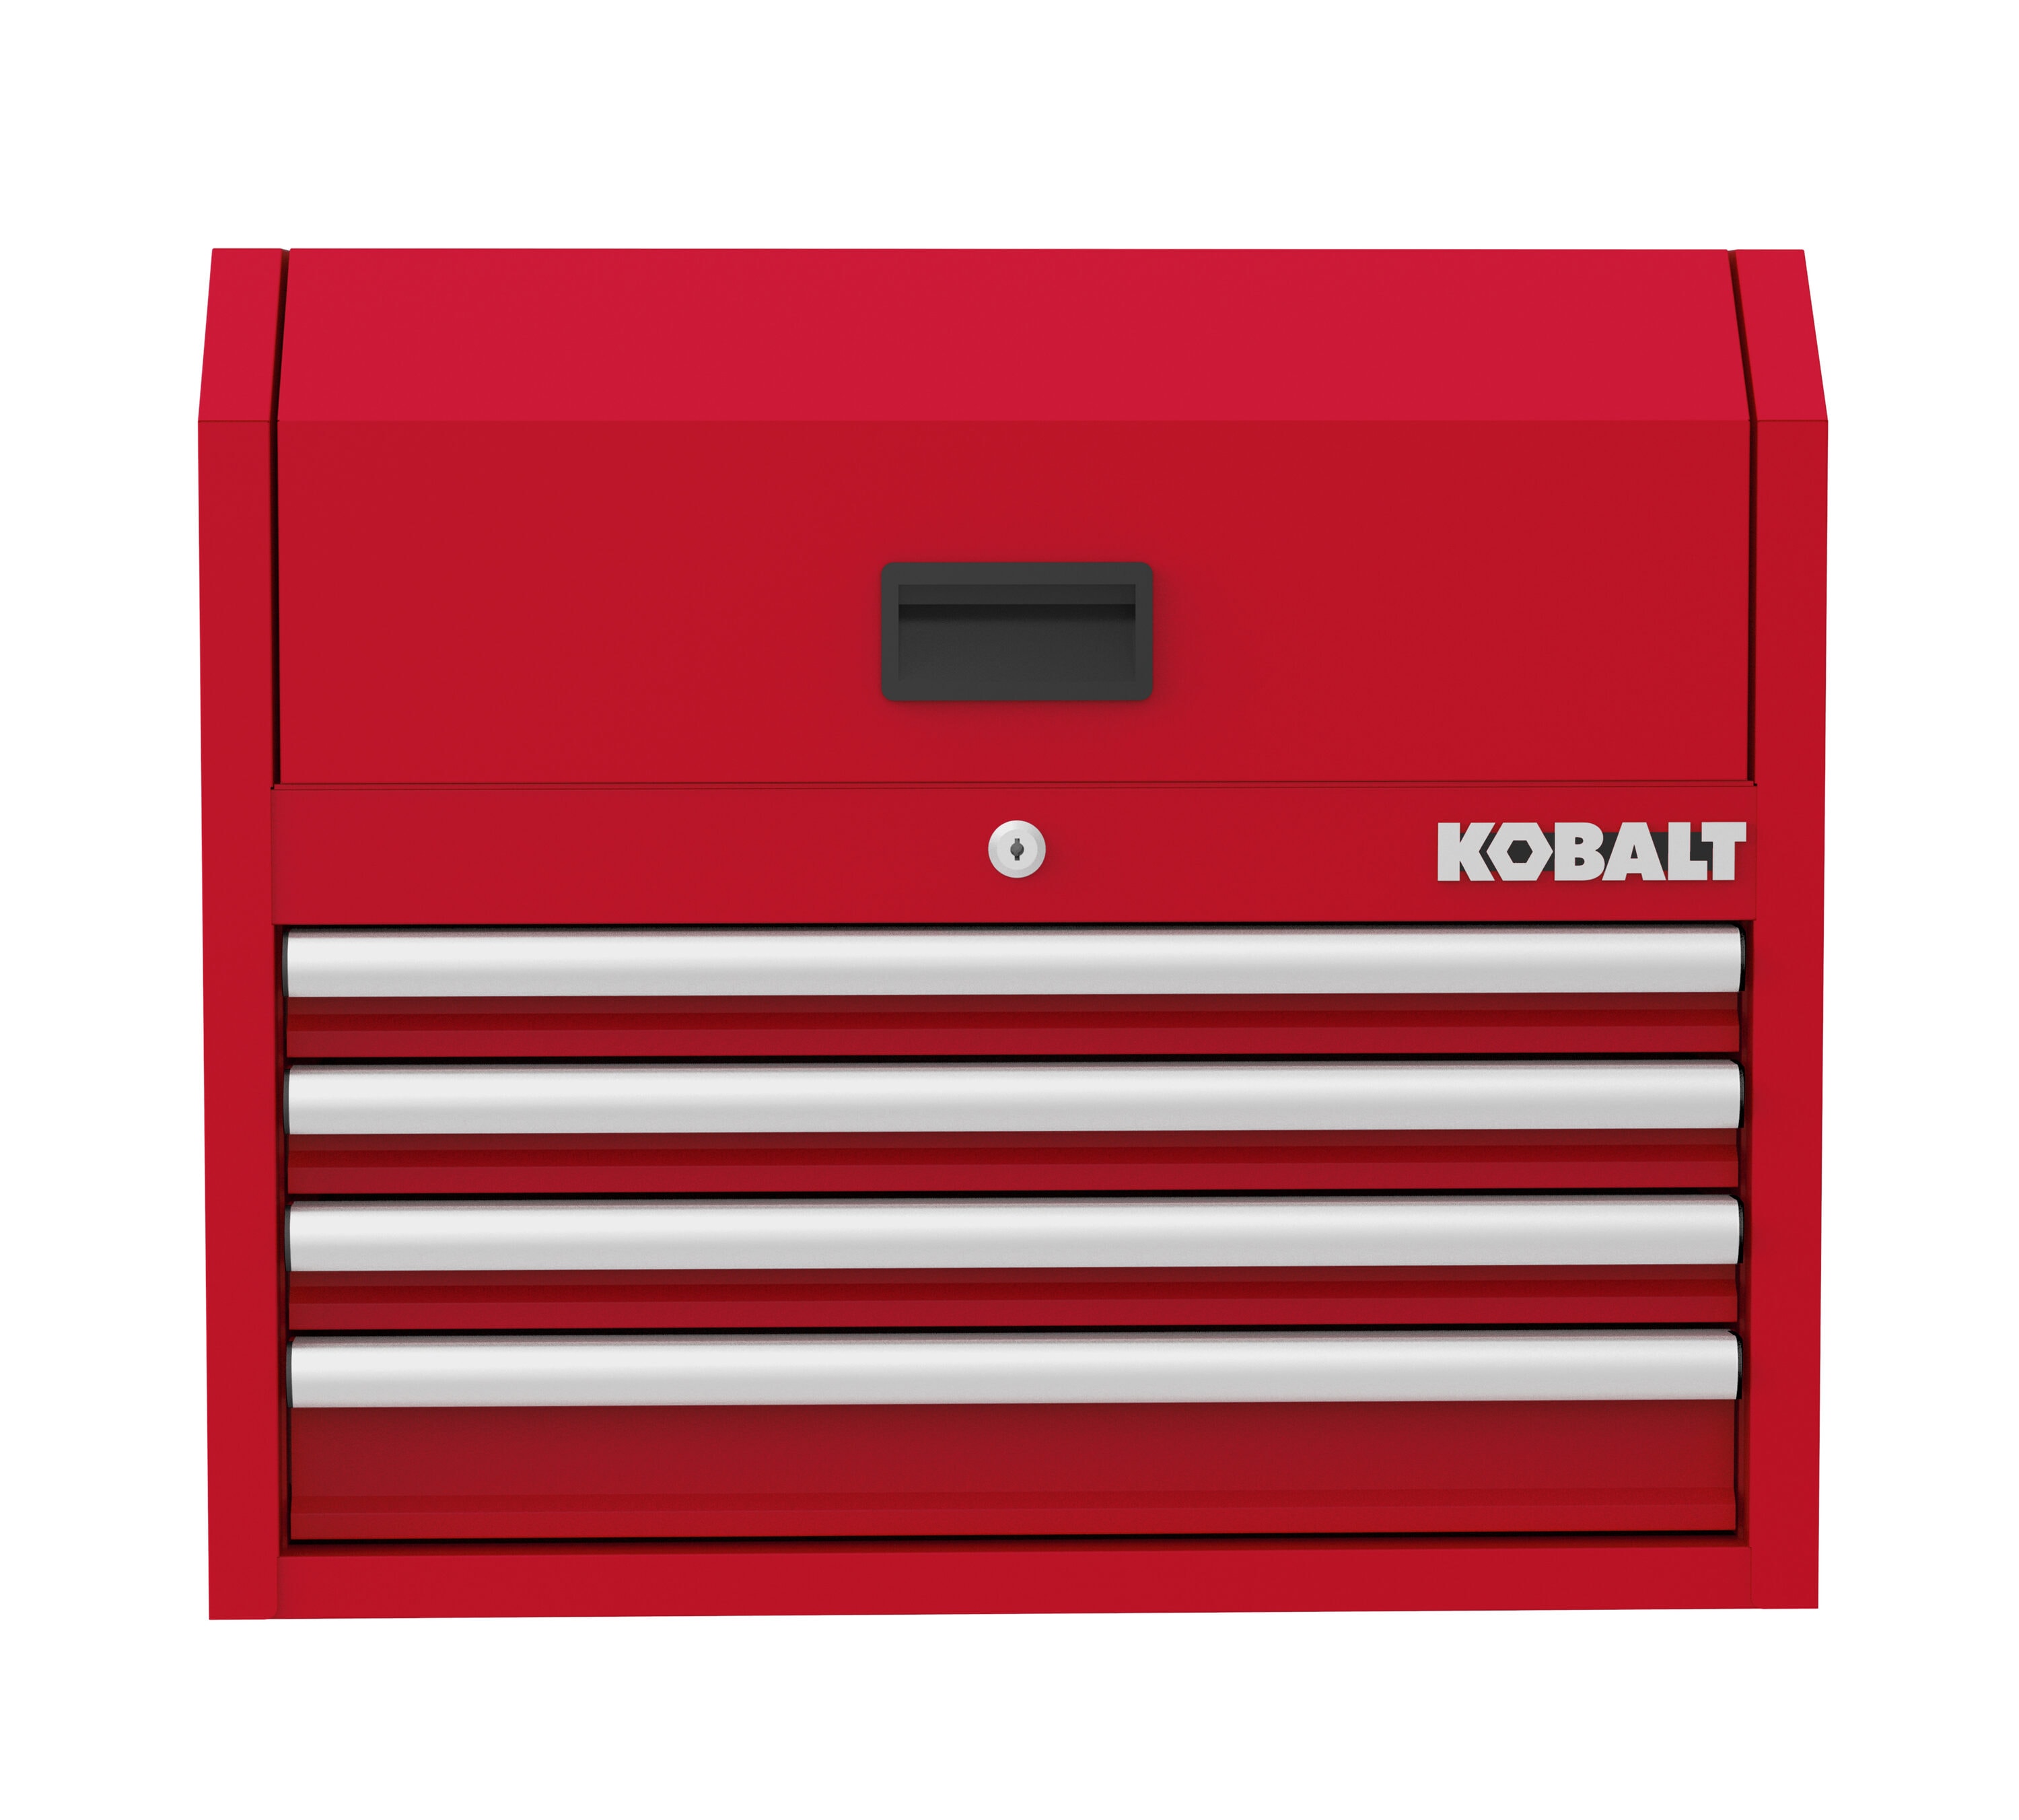 Kobalt 26-in W x 22-in H 4-Drawer Steel Tool Chest (Red) in the 